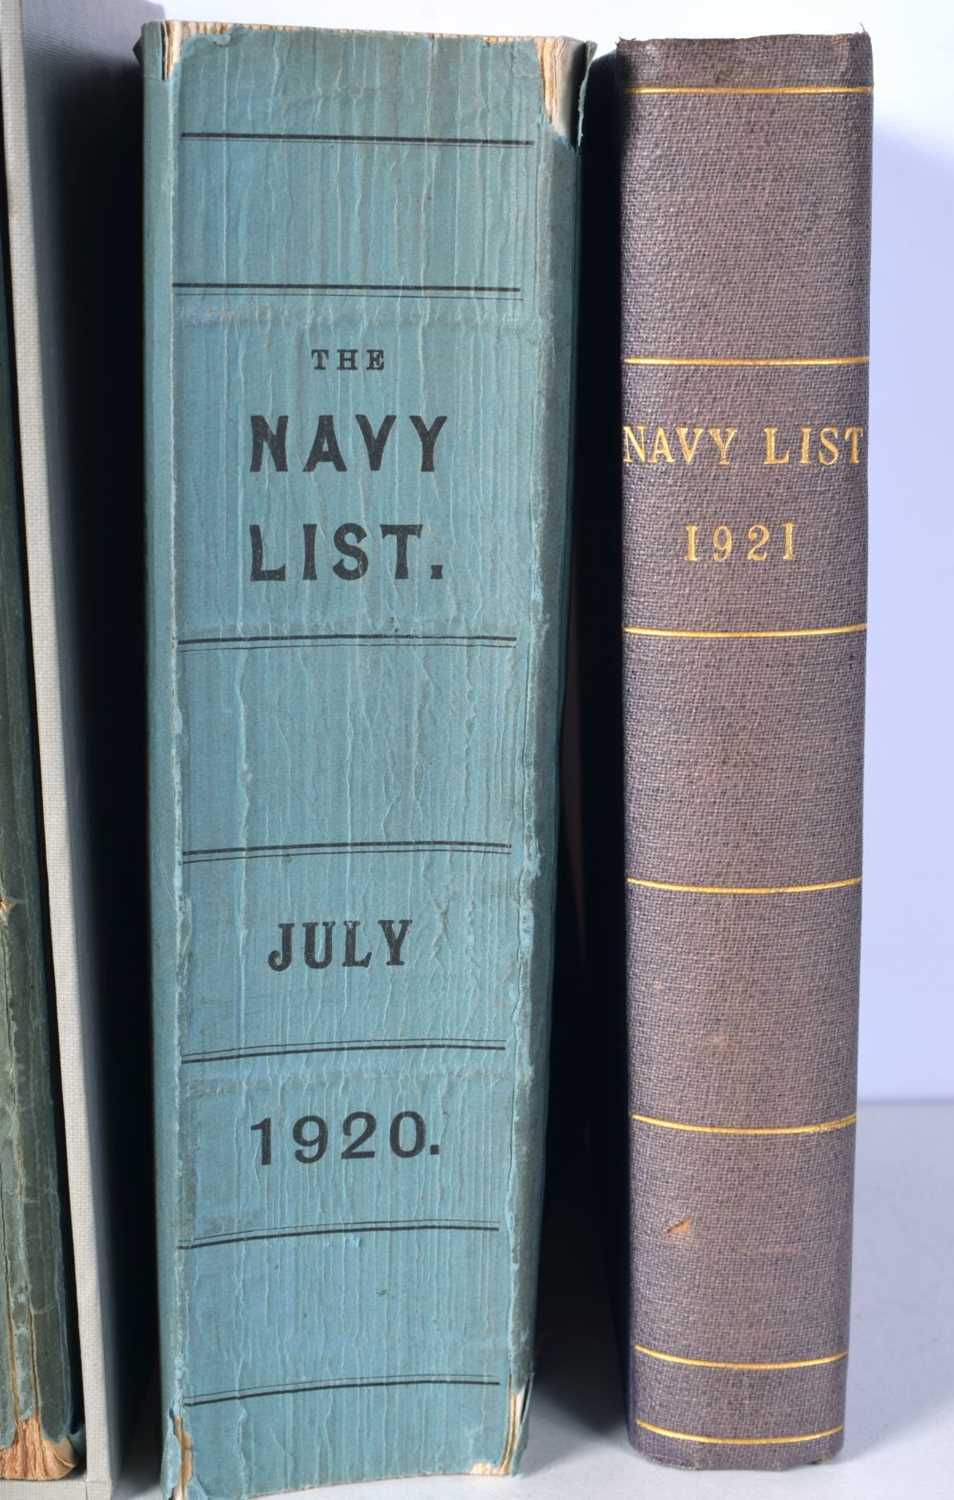 A collection of books related to "The Navy list " post WWall 1 1919-1921. (4). - Image 5 of 8